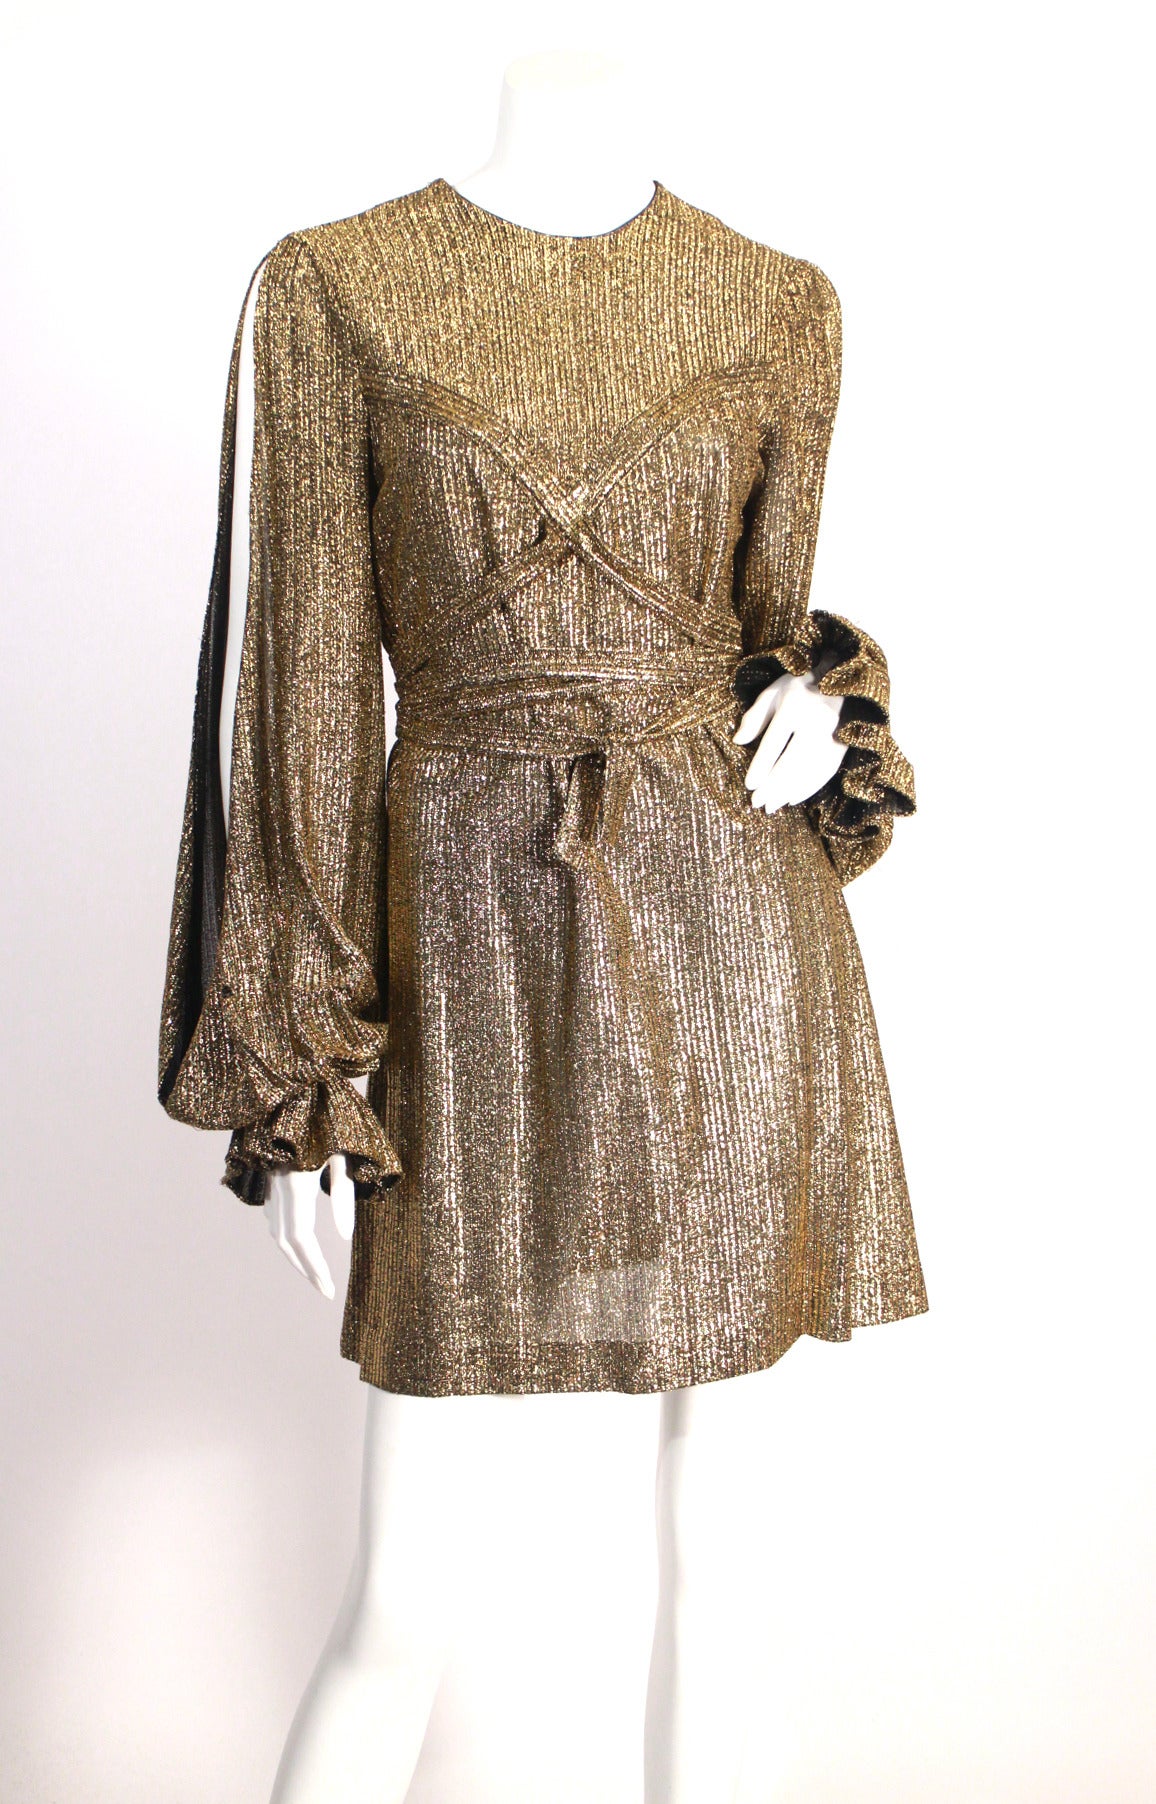 Paraphernalia for Betsey Johnson very rare gold lame mini dress. Features grecian style criss cross and open sleeves. Very good condition, super fun piece!

Size Small (2-4)

Circa late 1960s.